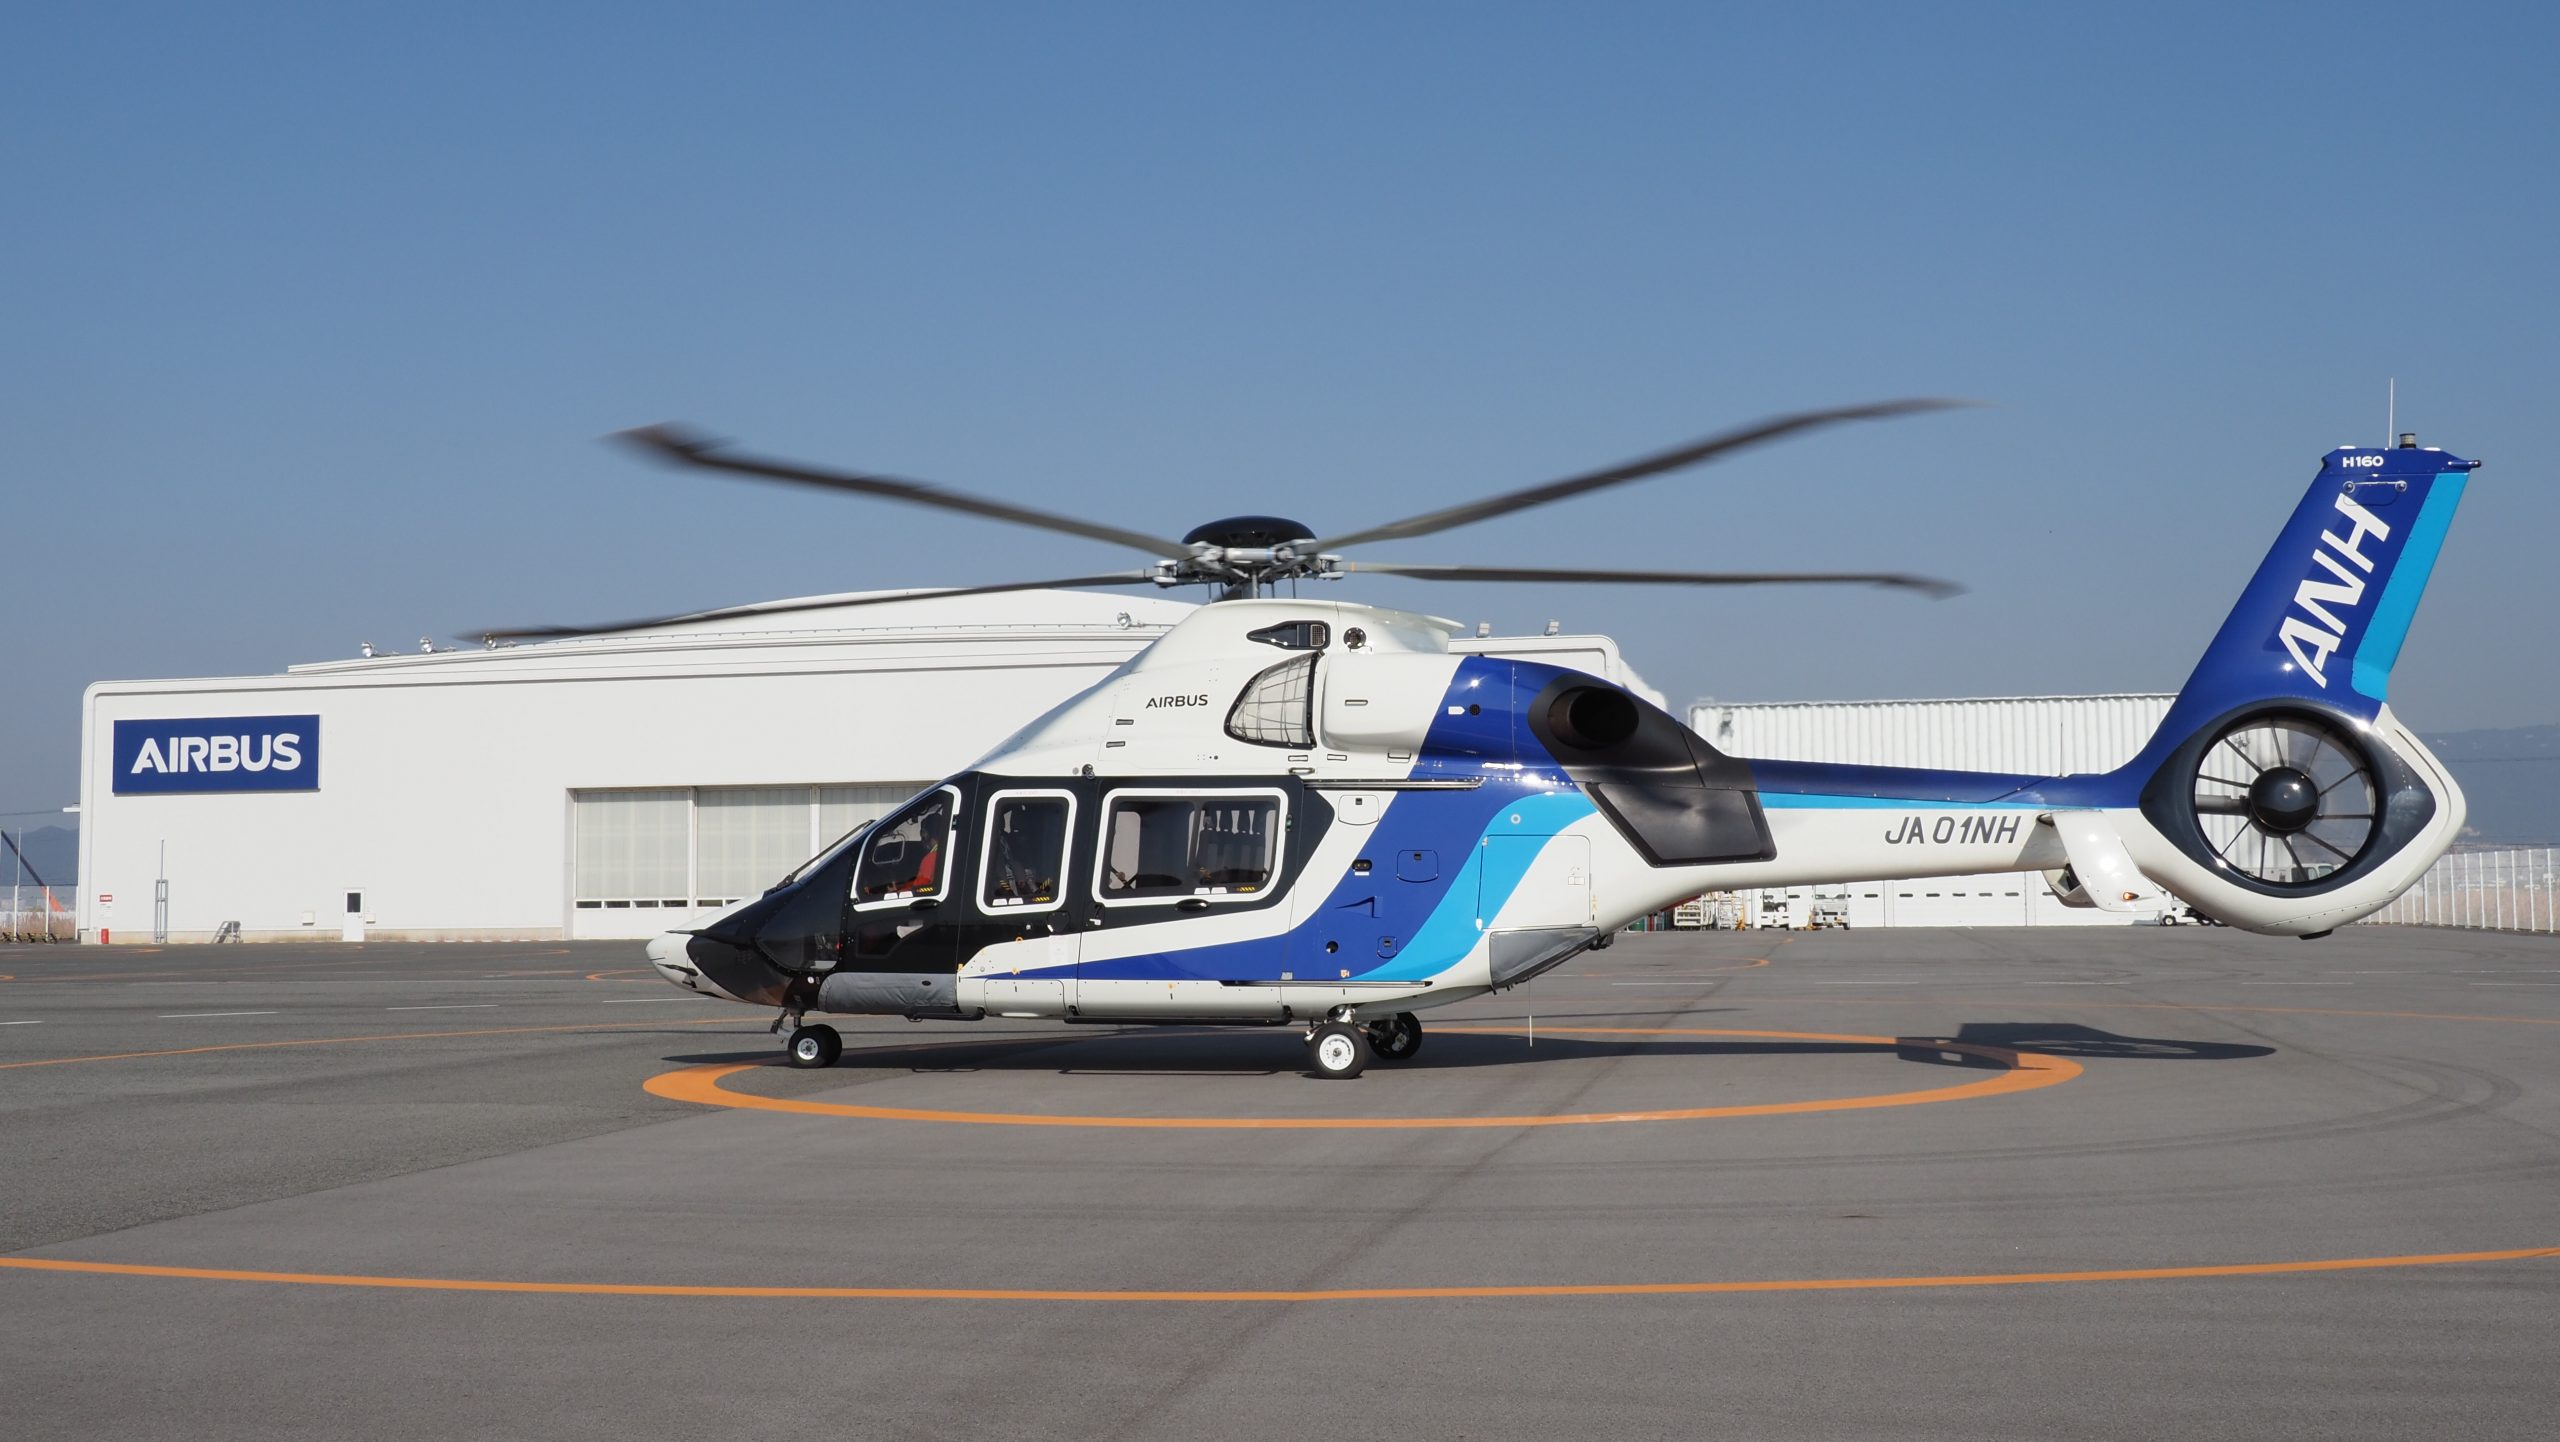 Airbus helicopters’ H160 gets approval to enter Malaysian skies